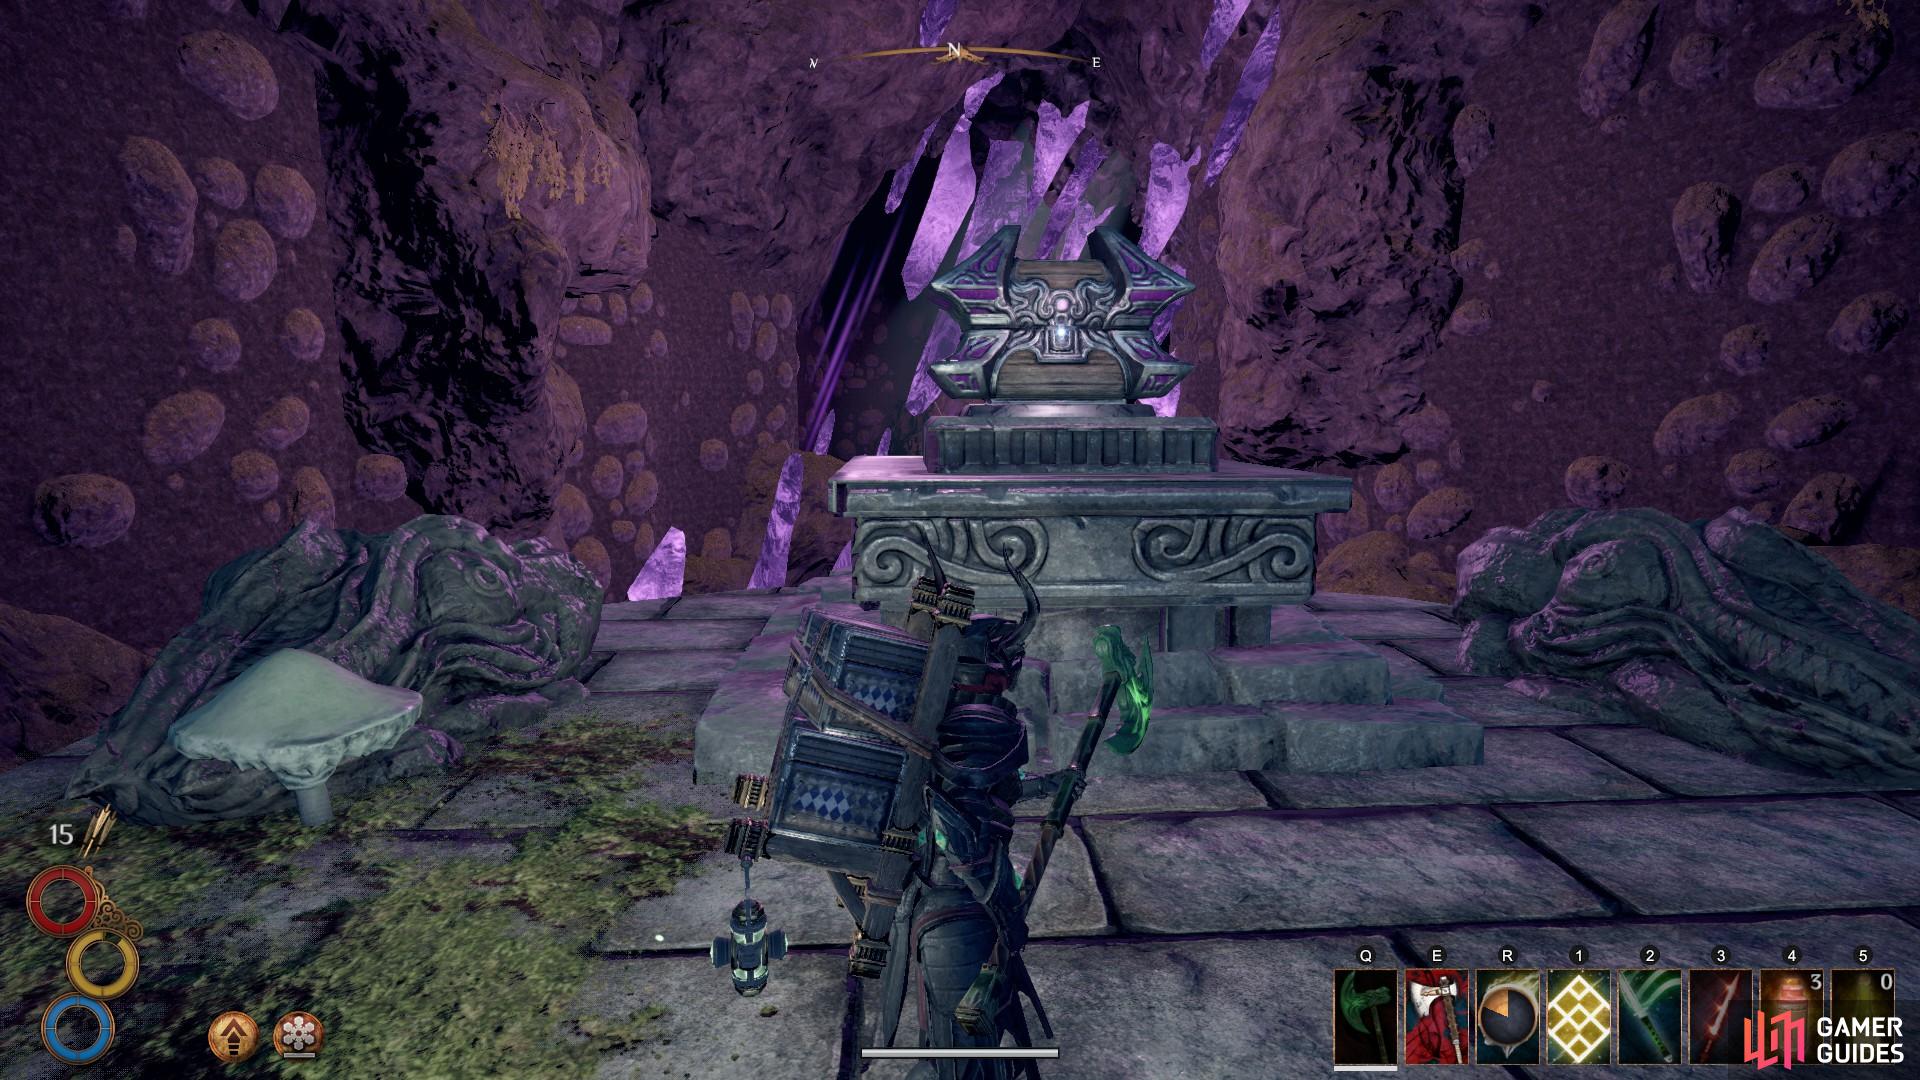 Approach the altar when the Troglodyte Queen is dead to reveal the Ornate Chest.